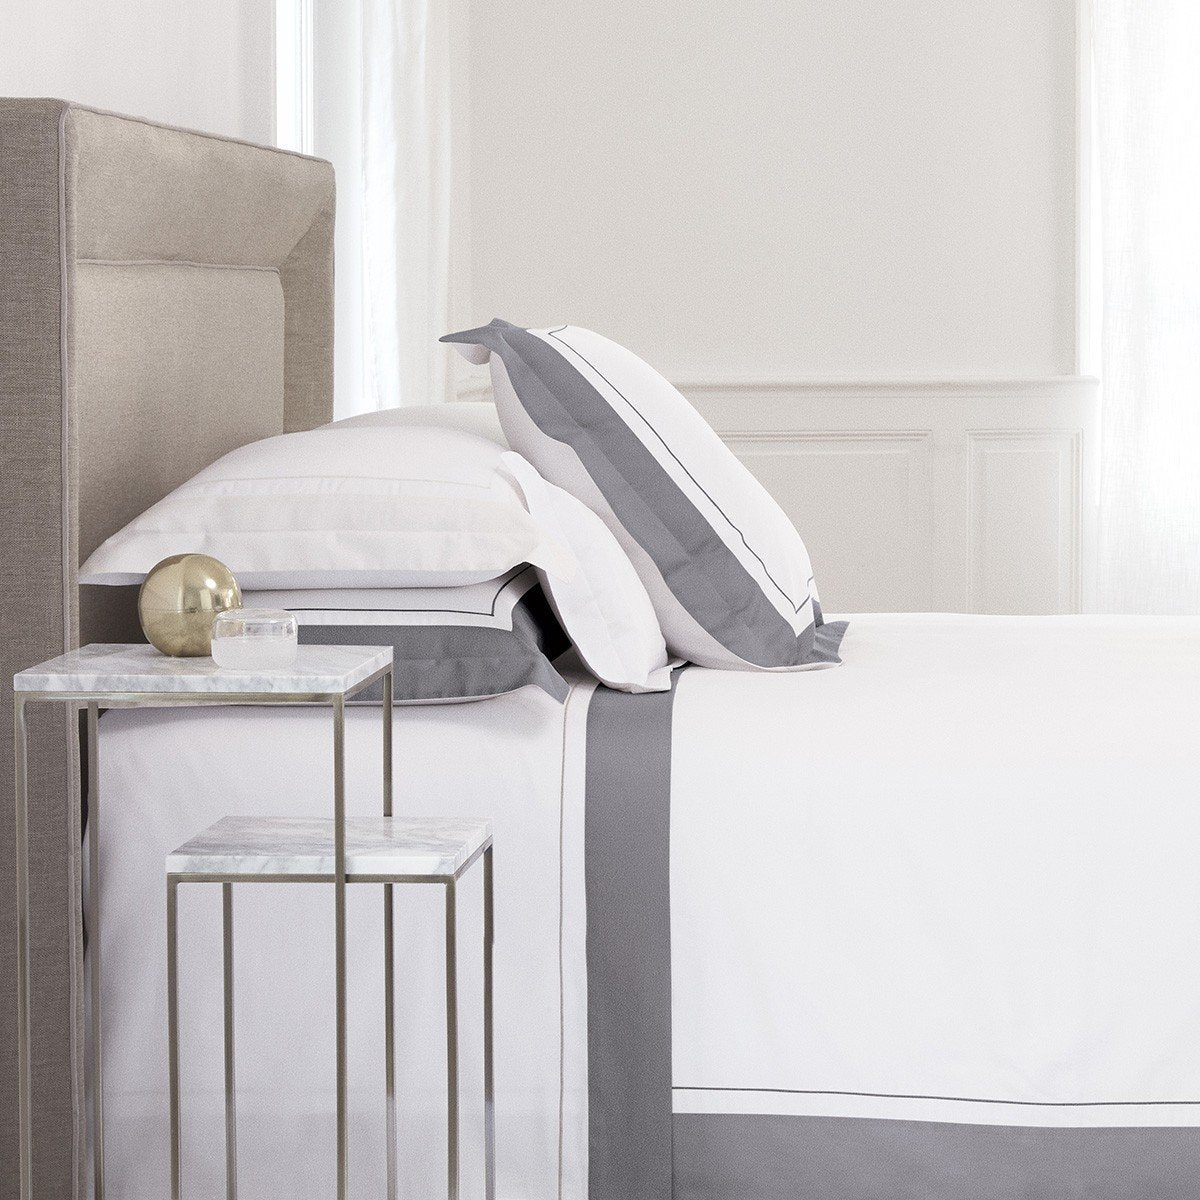 Lutece Platine Bedding by Yves Delorme | Fig Linens - Cotton, duvet cover, sheet, sham